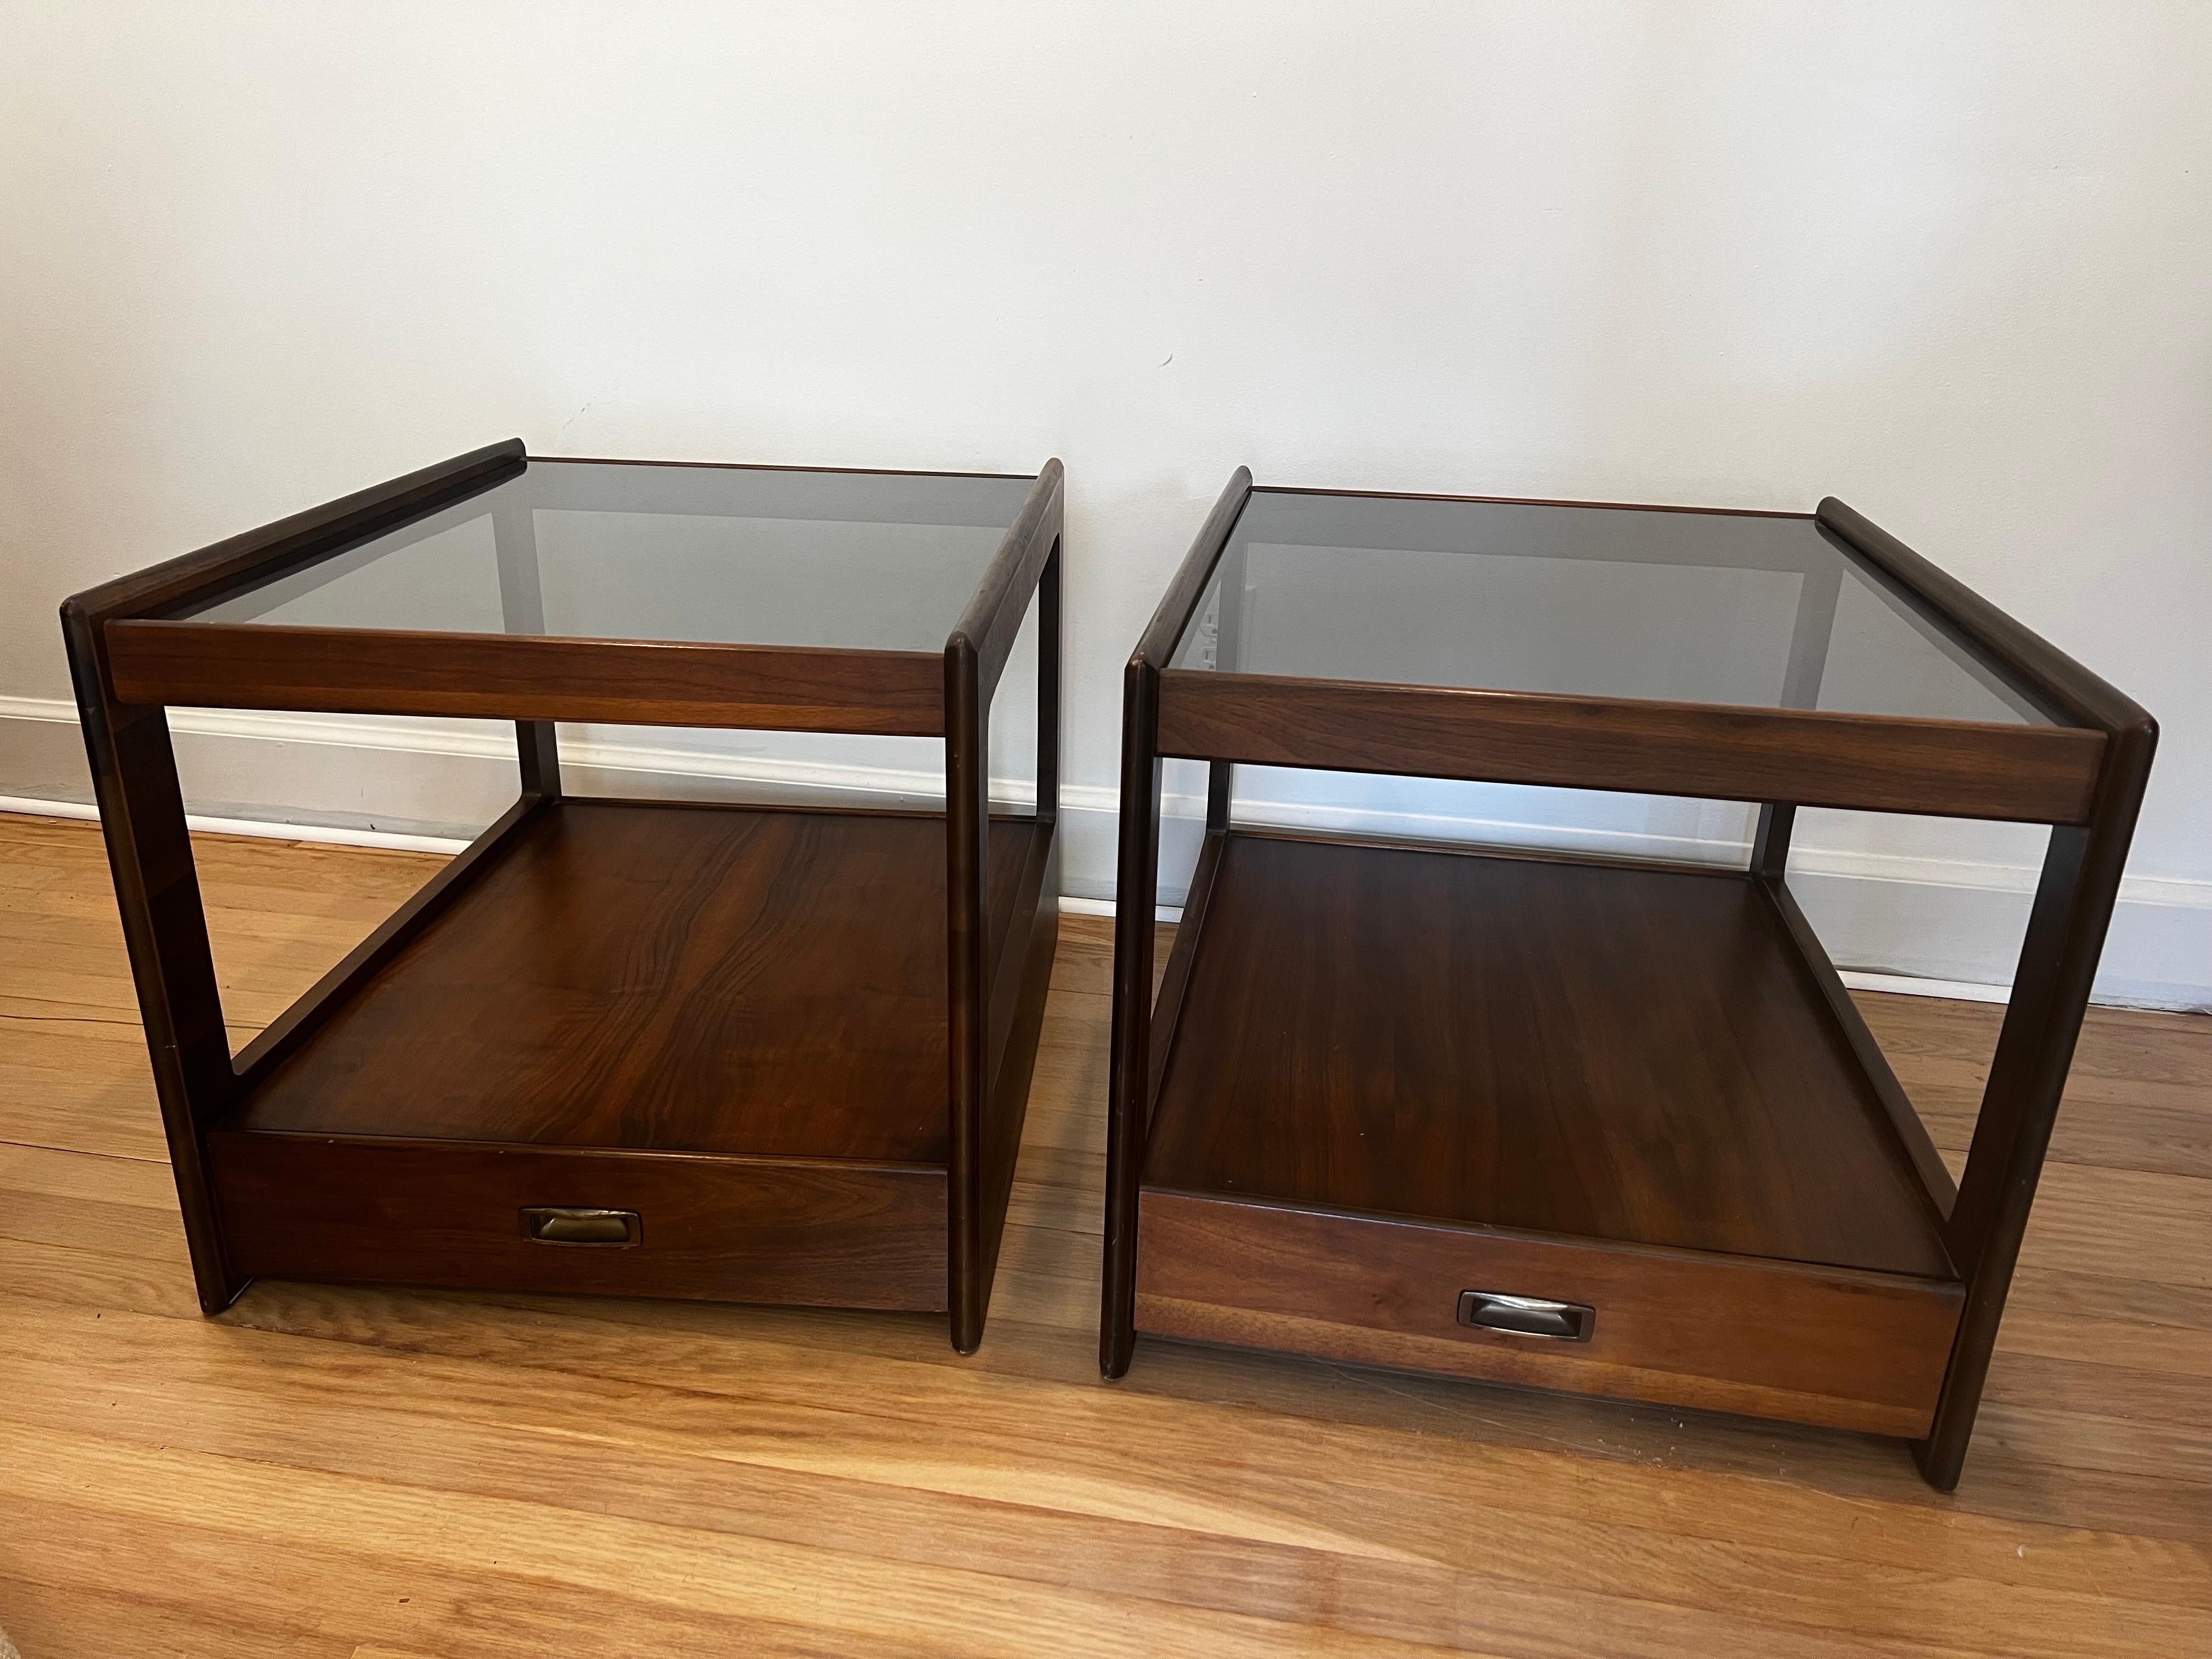 Pair of sophisticated streamlined single end tables in the style of John Keal for Saltman Brown.   Walnut with smoked glass tops. 
Drawers open and close smoothly.

*Matching coffee table available.   See other listing.   